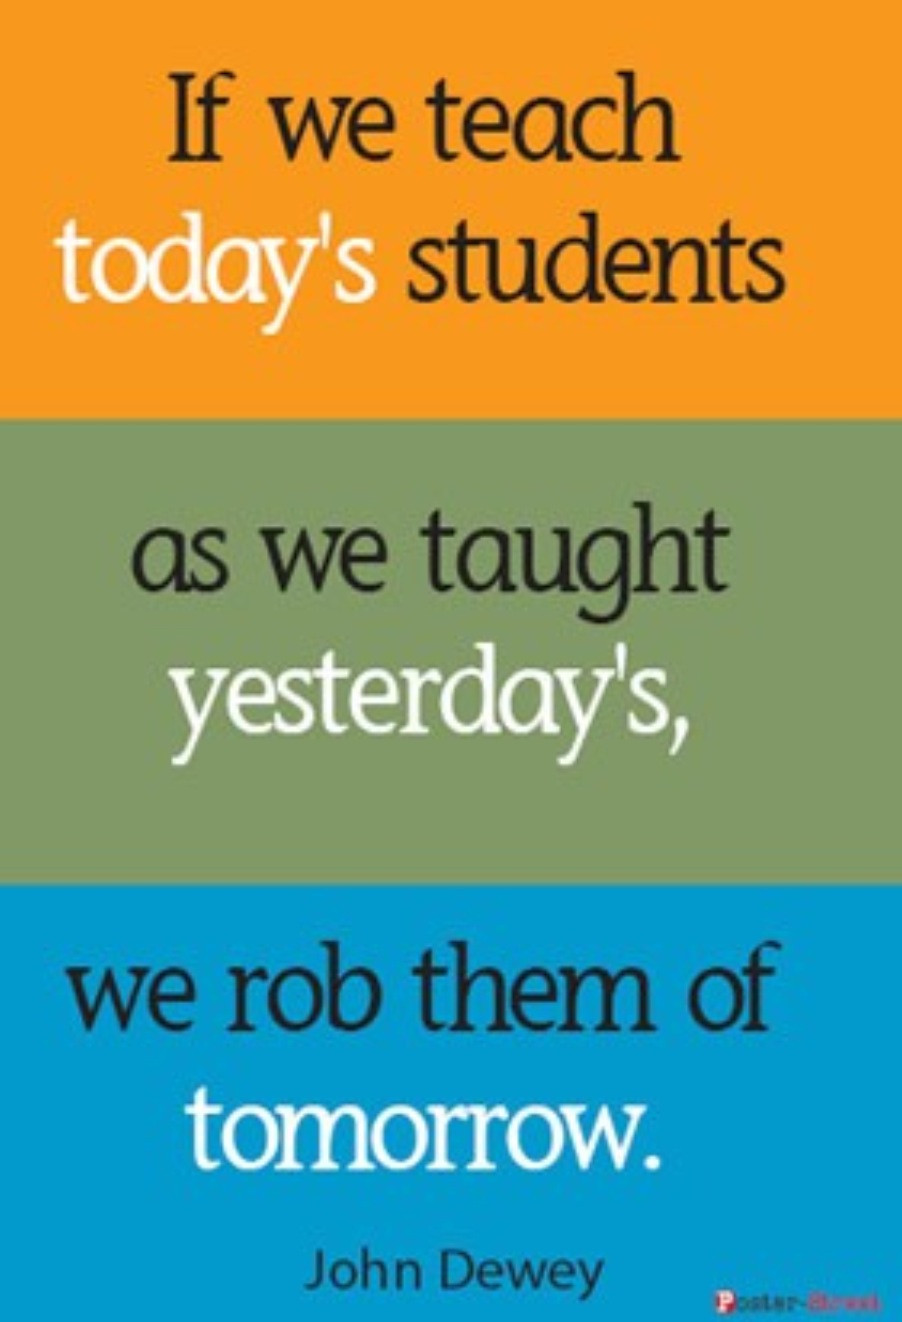 Quotes About Technology In Education
 Quotes About Technology In Education QuotesGram